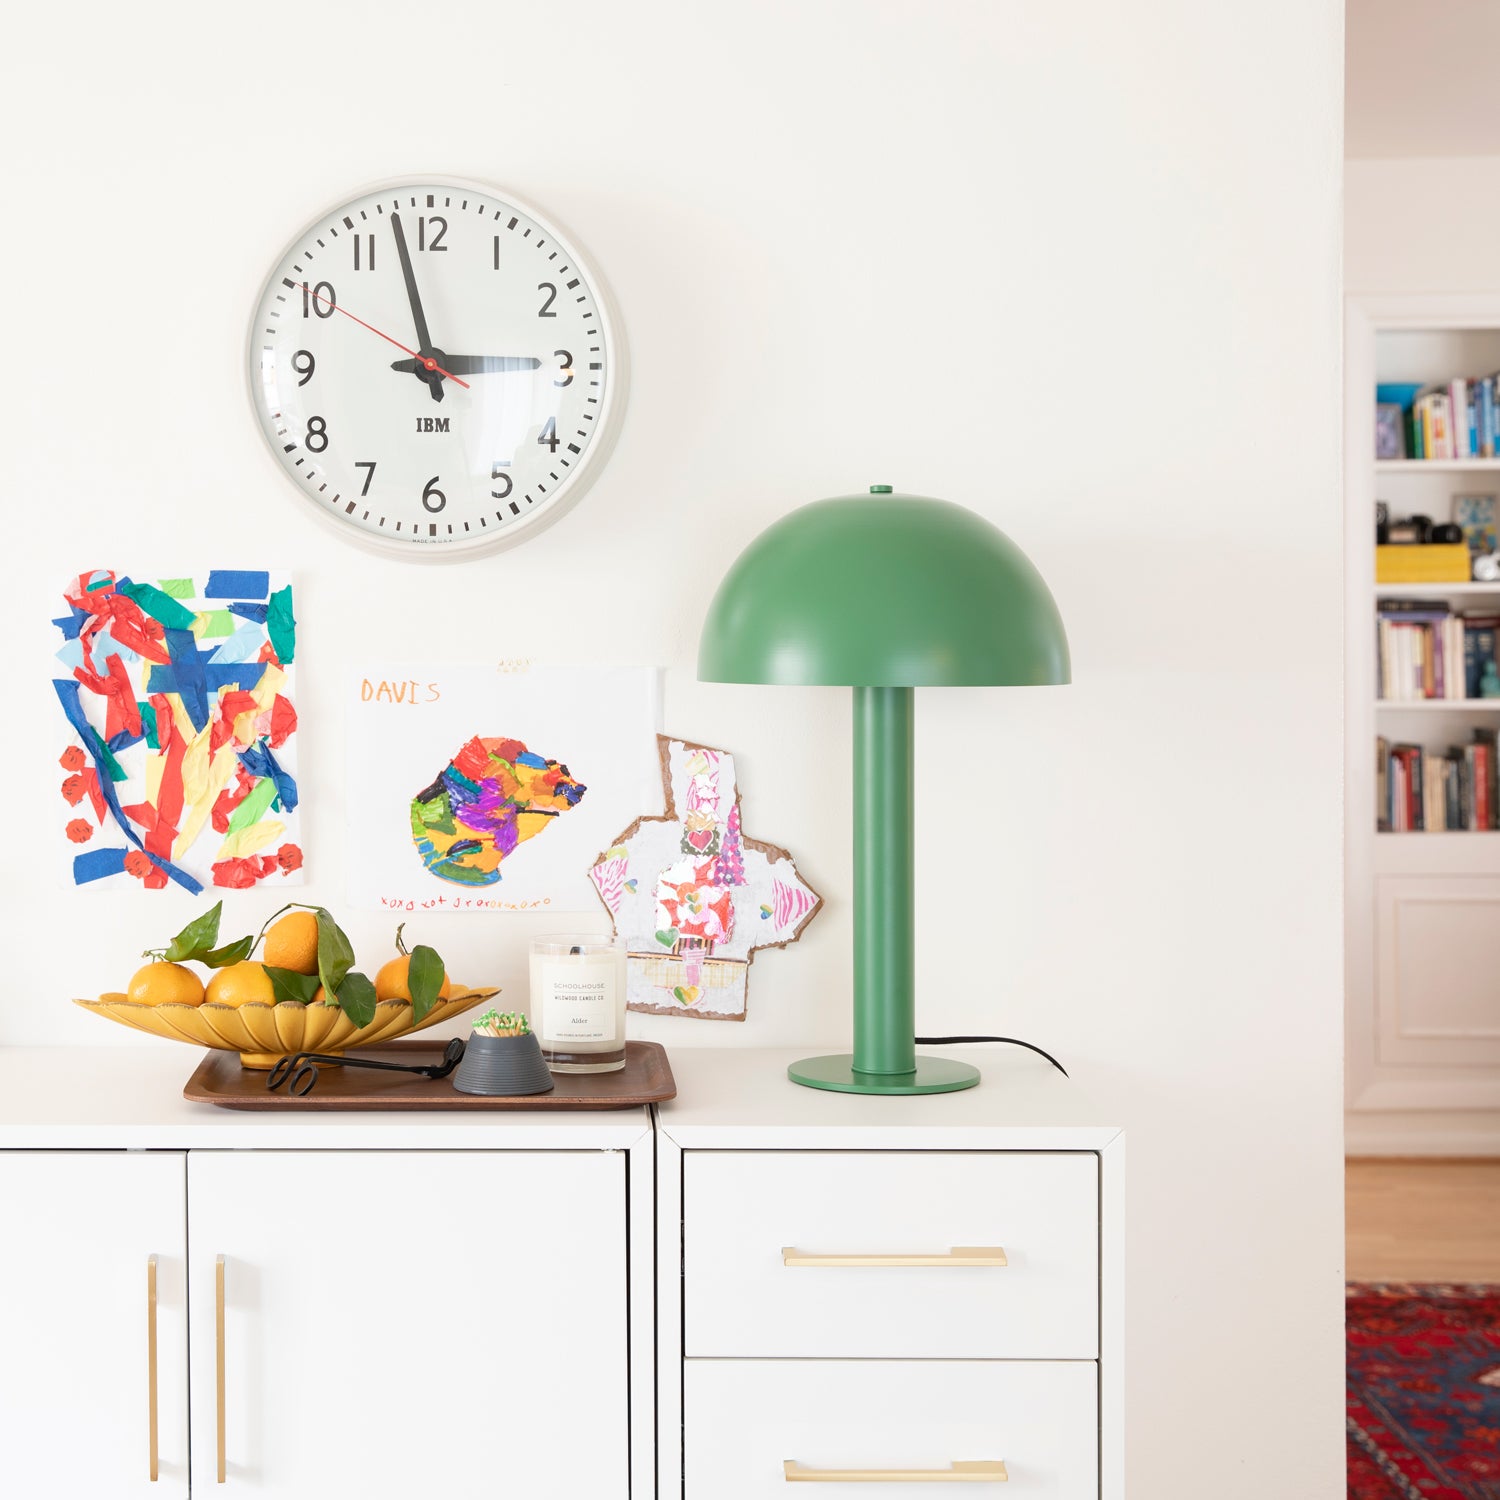 clock on a wall and a green table lamp on a cabinet